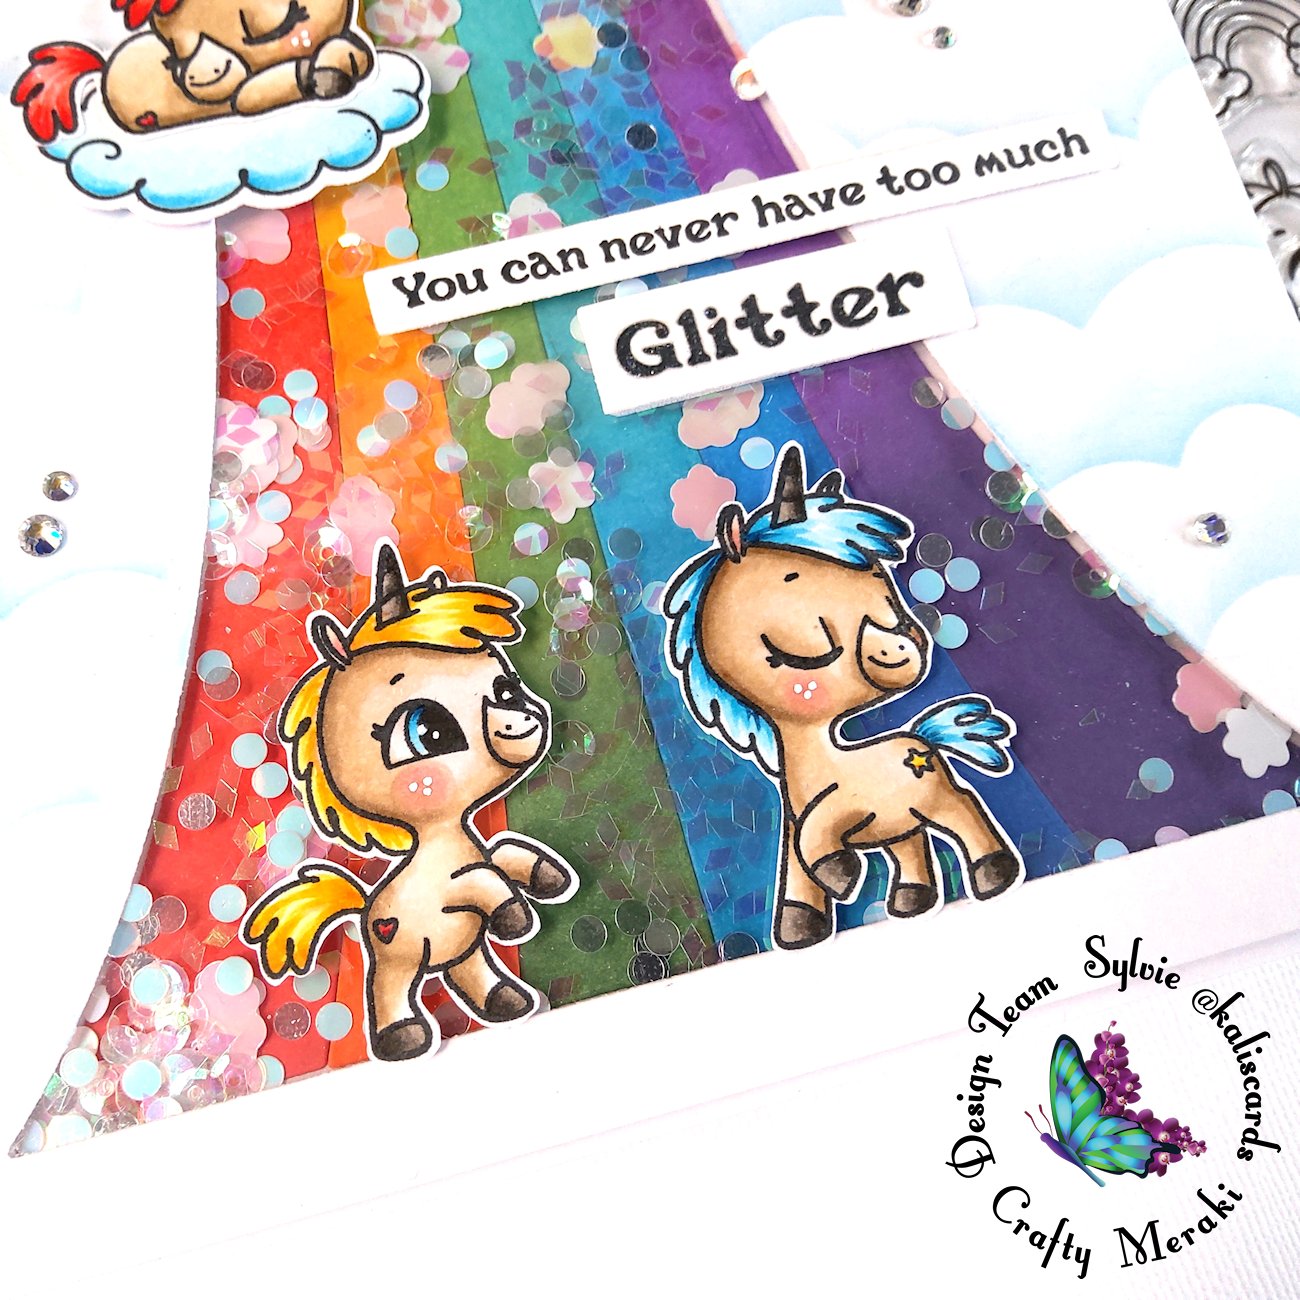 Never too much glitter by Sylvie @Kaliscards